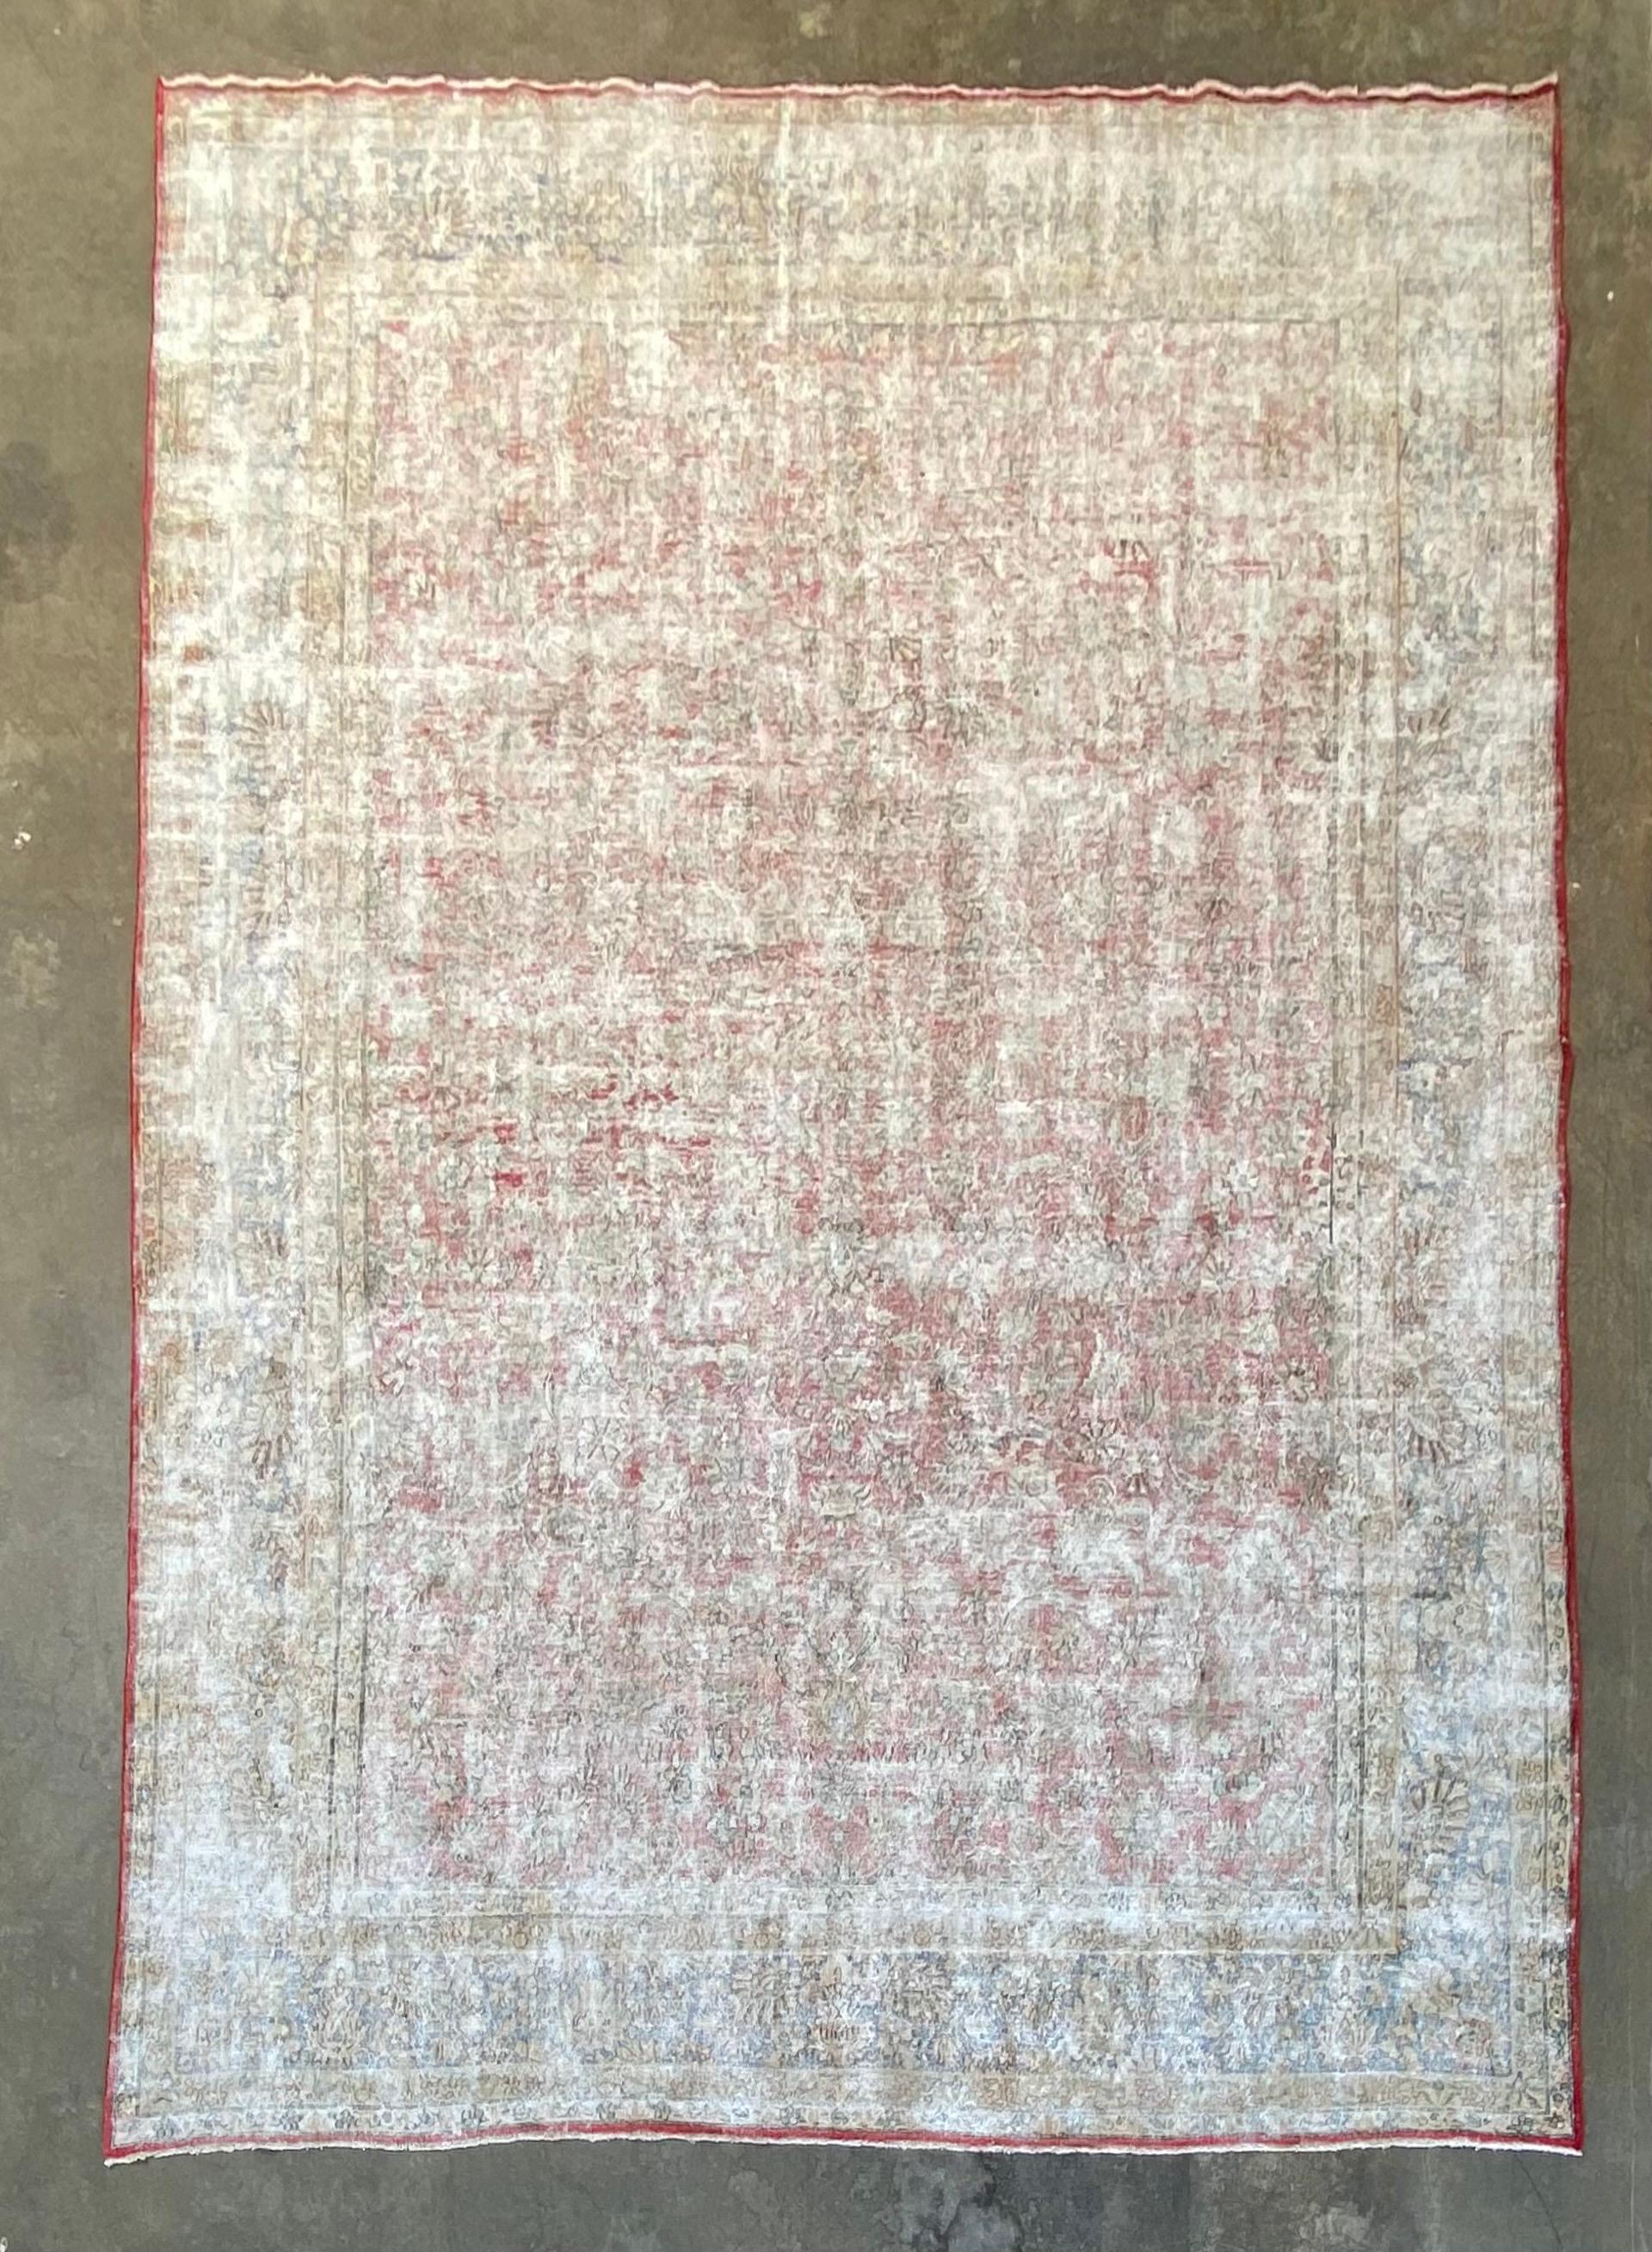 Vintage Turkish rug room size 9 x 12
9’ x 12’ rug
Reversible, the faded side is the face, however the backside can be used as well, if you would like a deeper richer color.
This vintage rug look to be in good condition, has been cleaned, and is